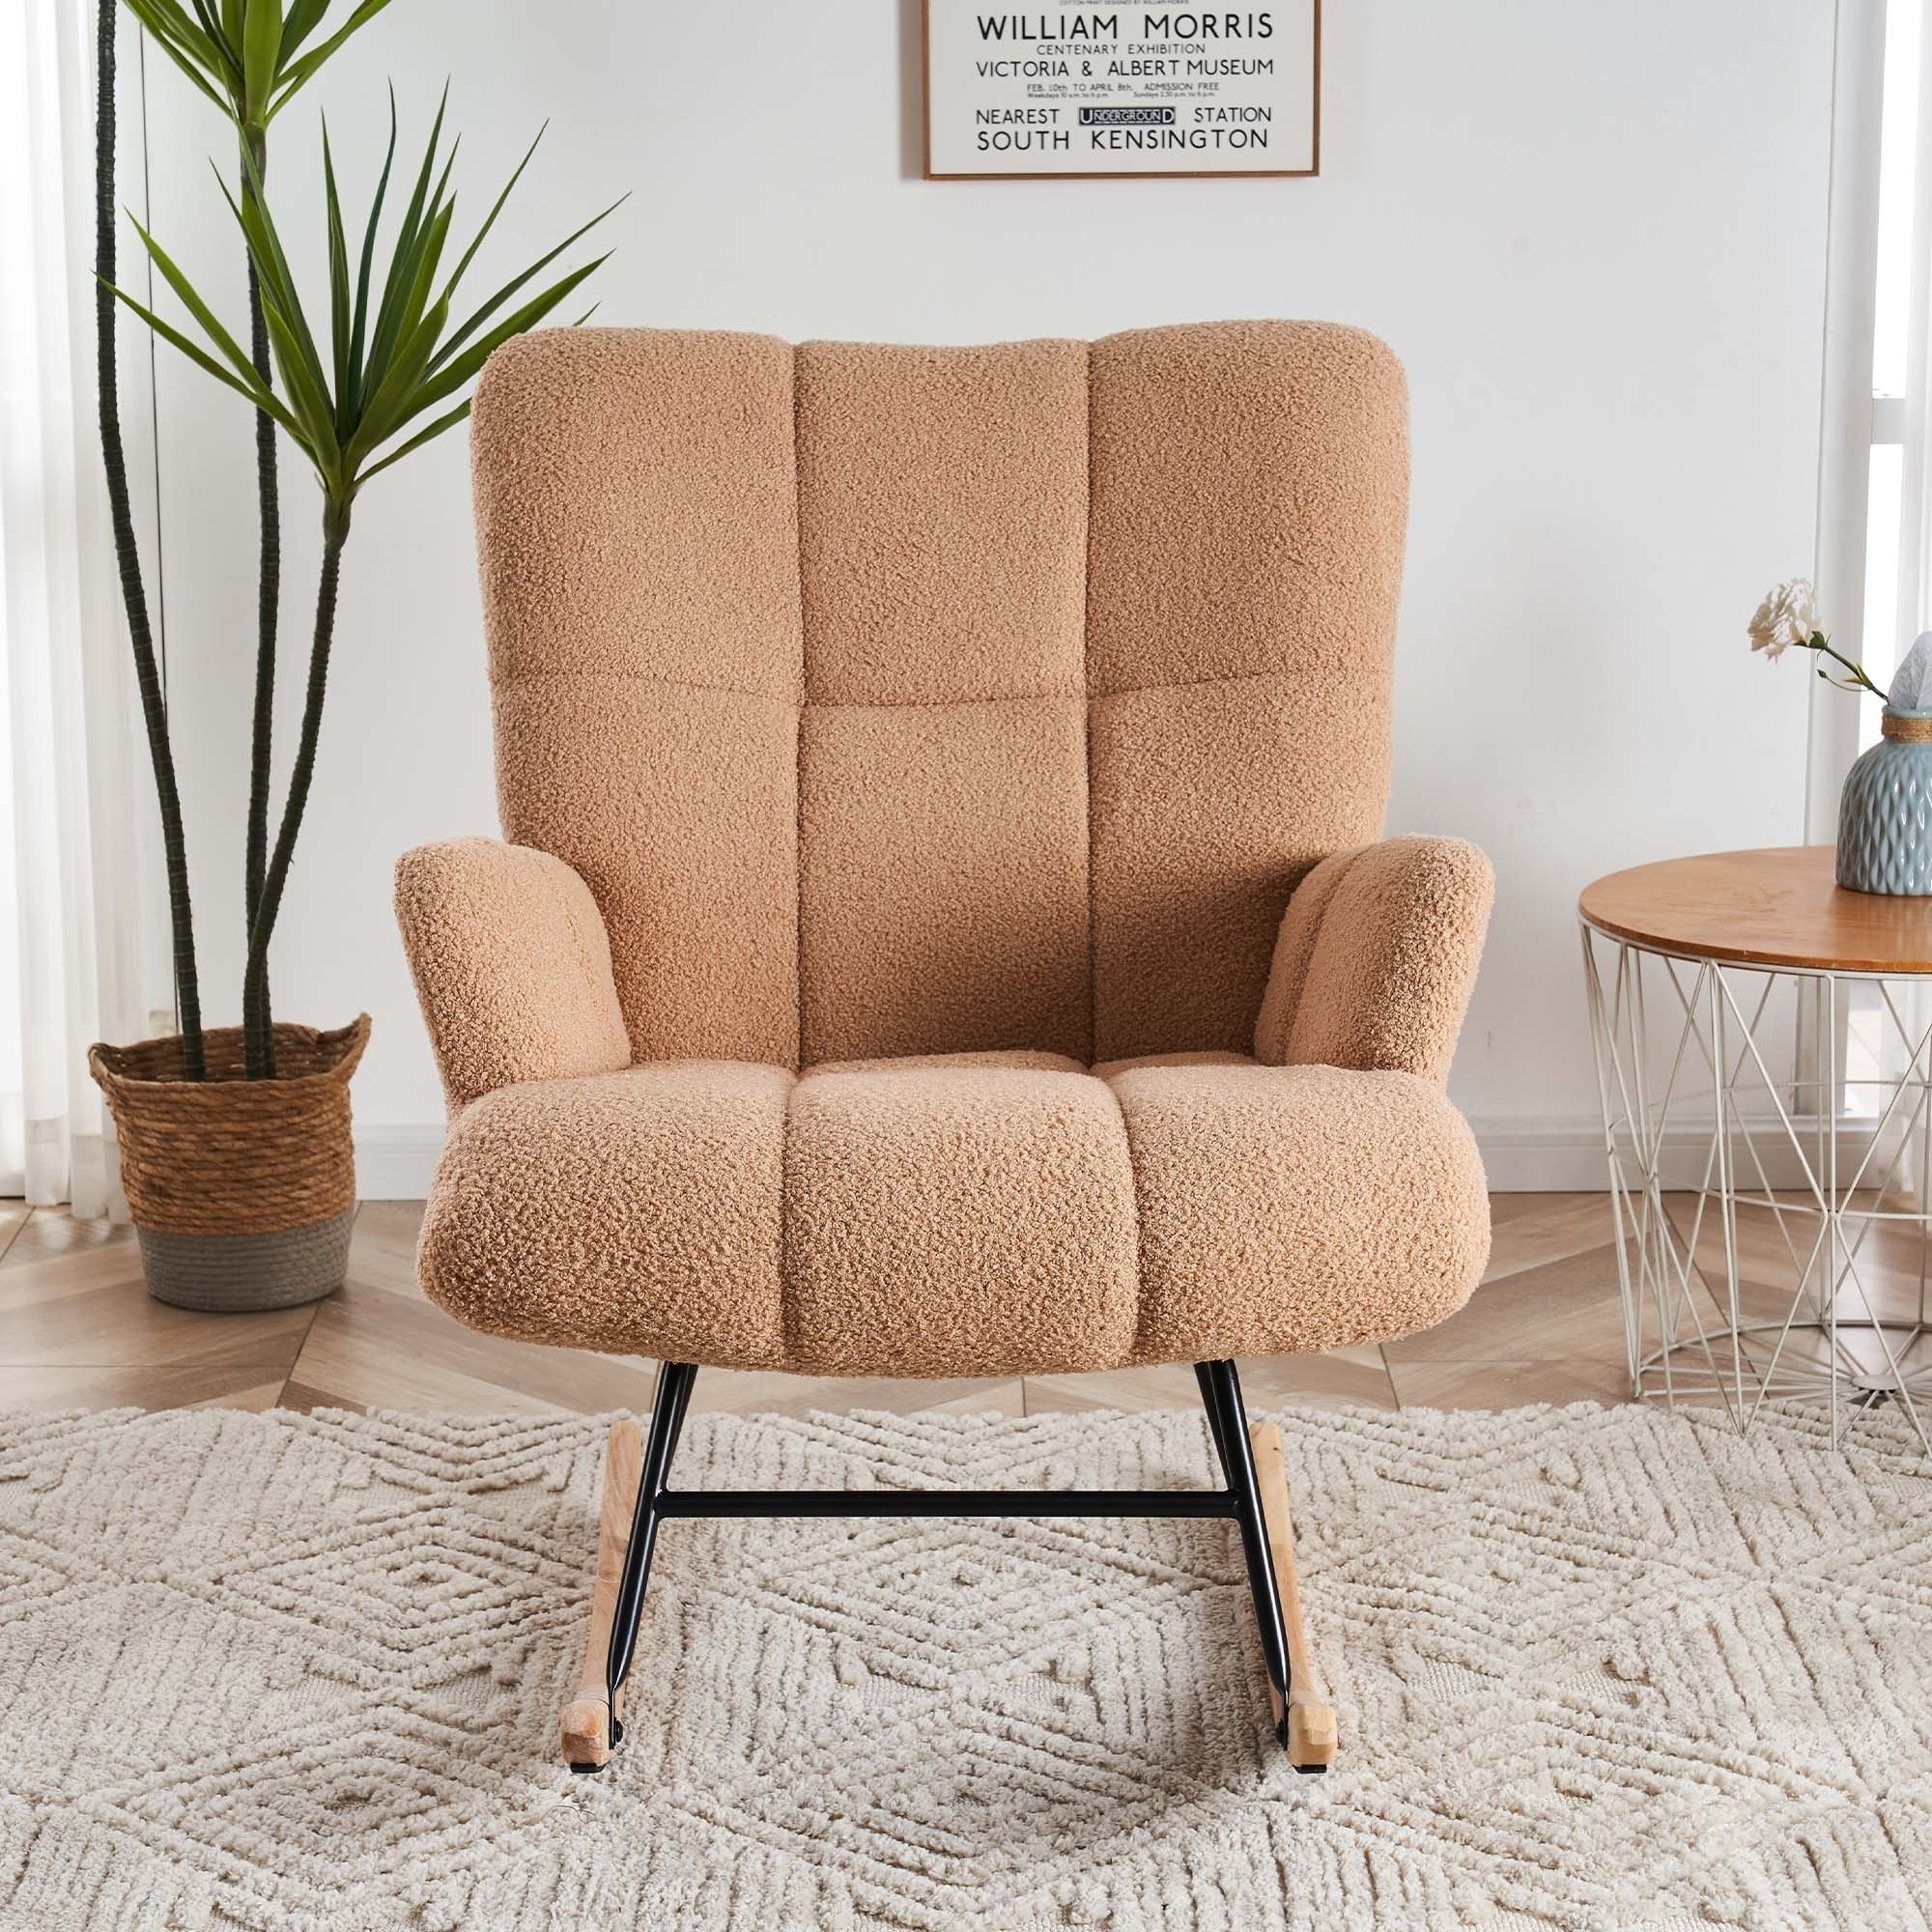 Modern Soft Teddy Glider Rocker With Padded Seat And High Backrest, Rocking Chair Nursery, Comfy Velvet Upholstered Wingback Accent Chair